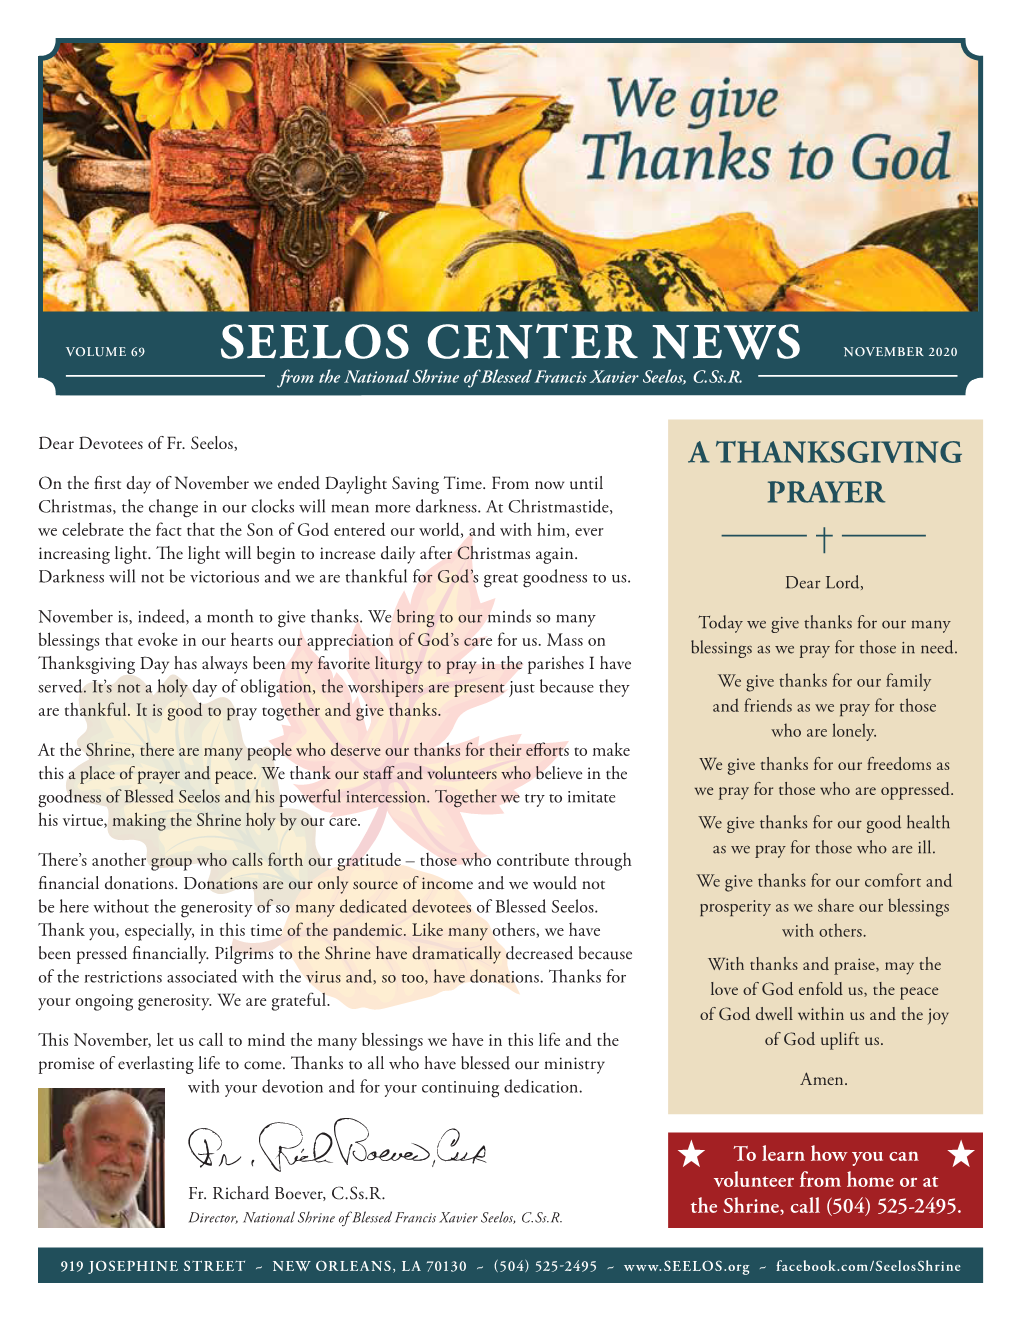 SEELOS CENTER NEWS NOVEMBER 2020 from the National Shrine of Blessed Francis Xavier Seelos, C.Ss.R